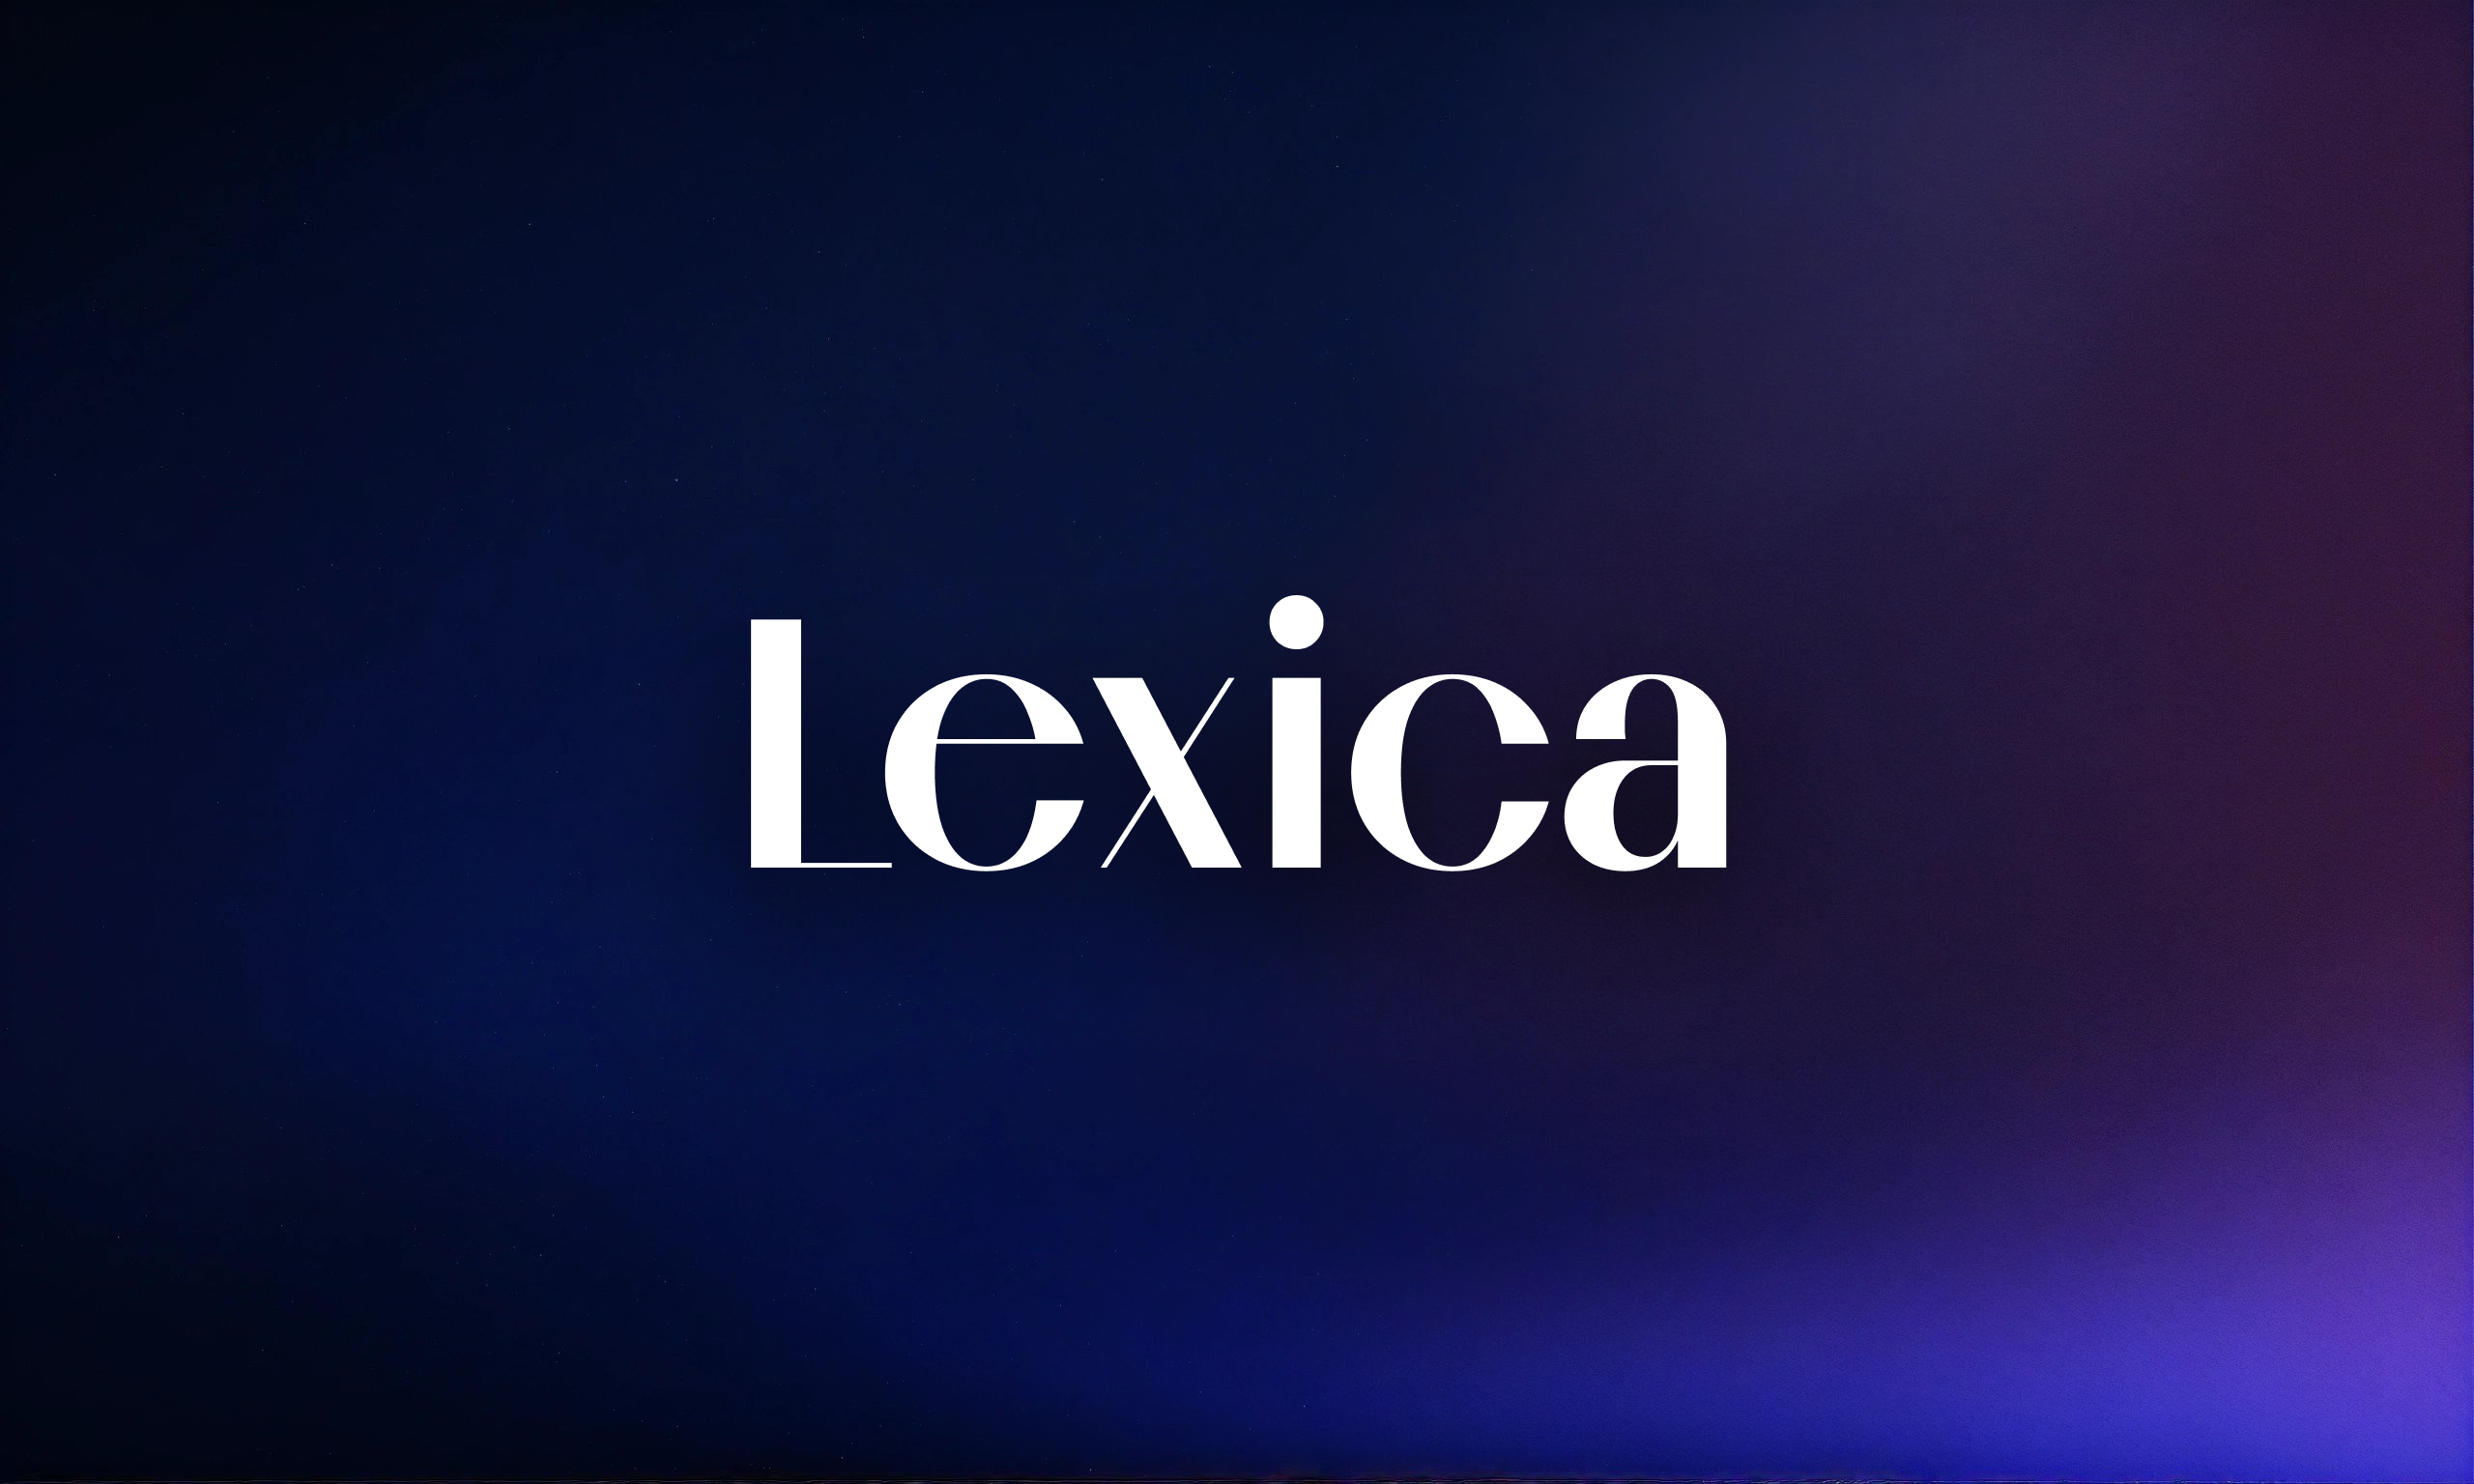 Search AI-generated Images and Art with Lexica